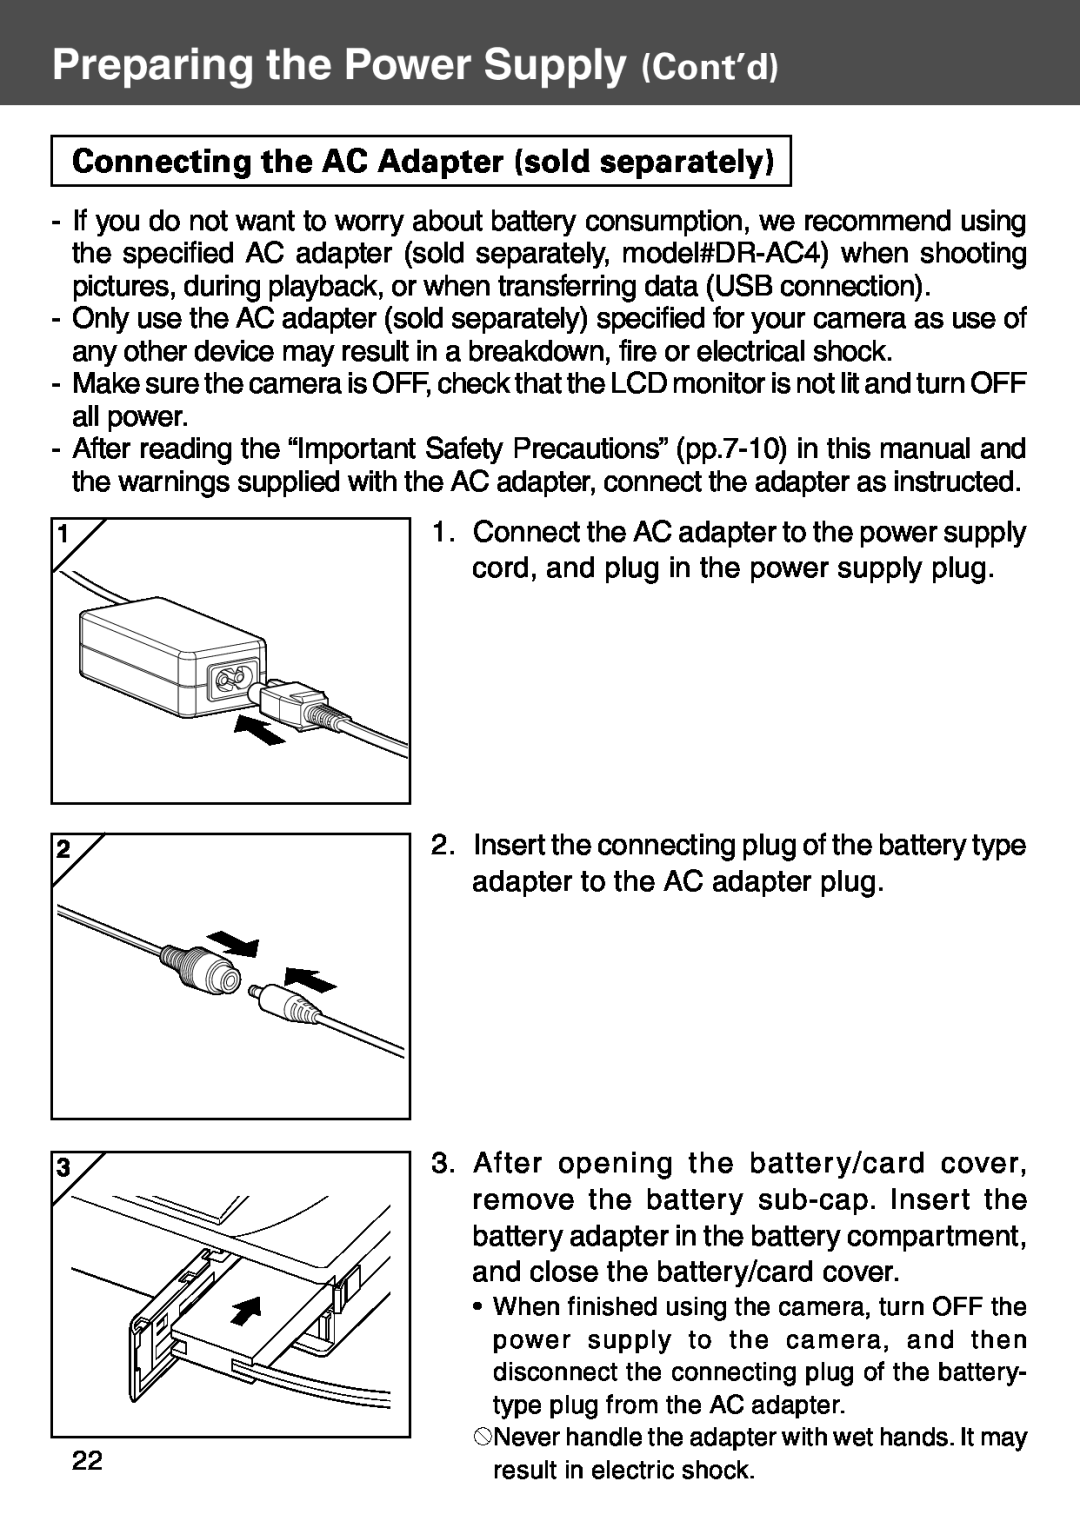 Konica Minolta KD-500Z user manual Connecting the AC Adapter sold separately, Preparing the Power Supply Cont’d 